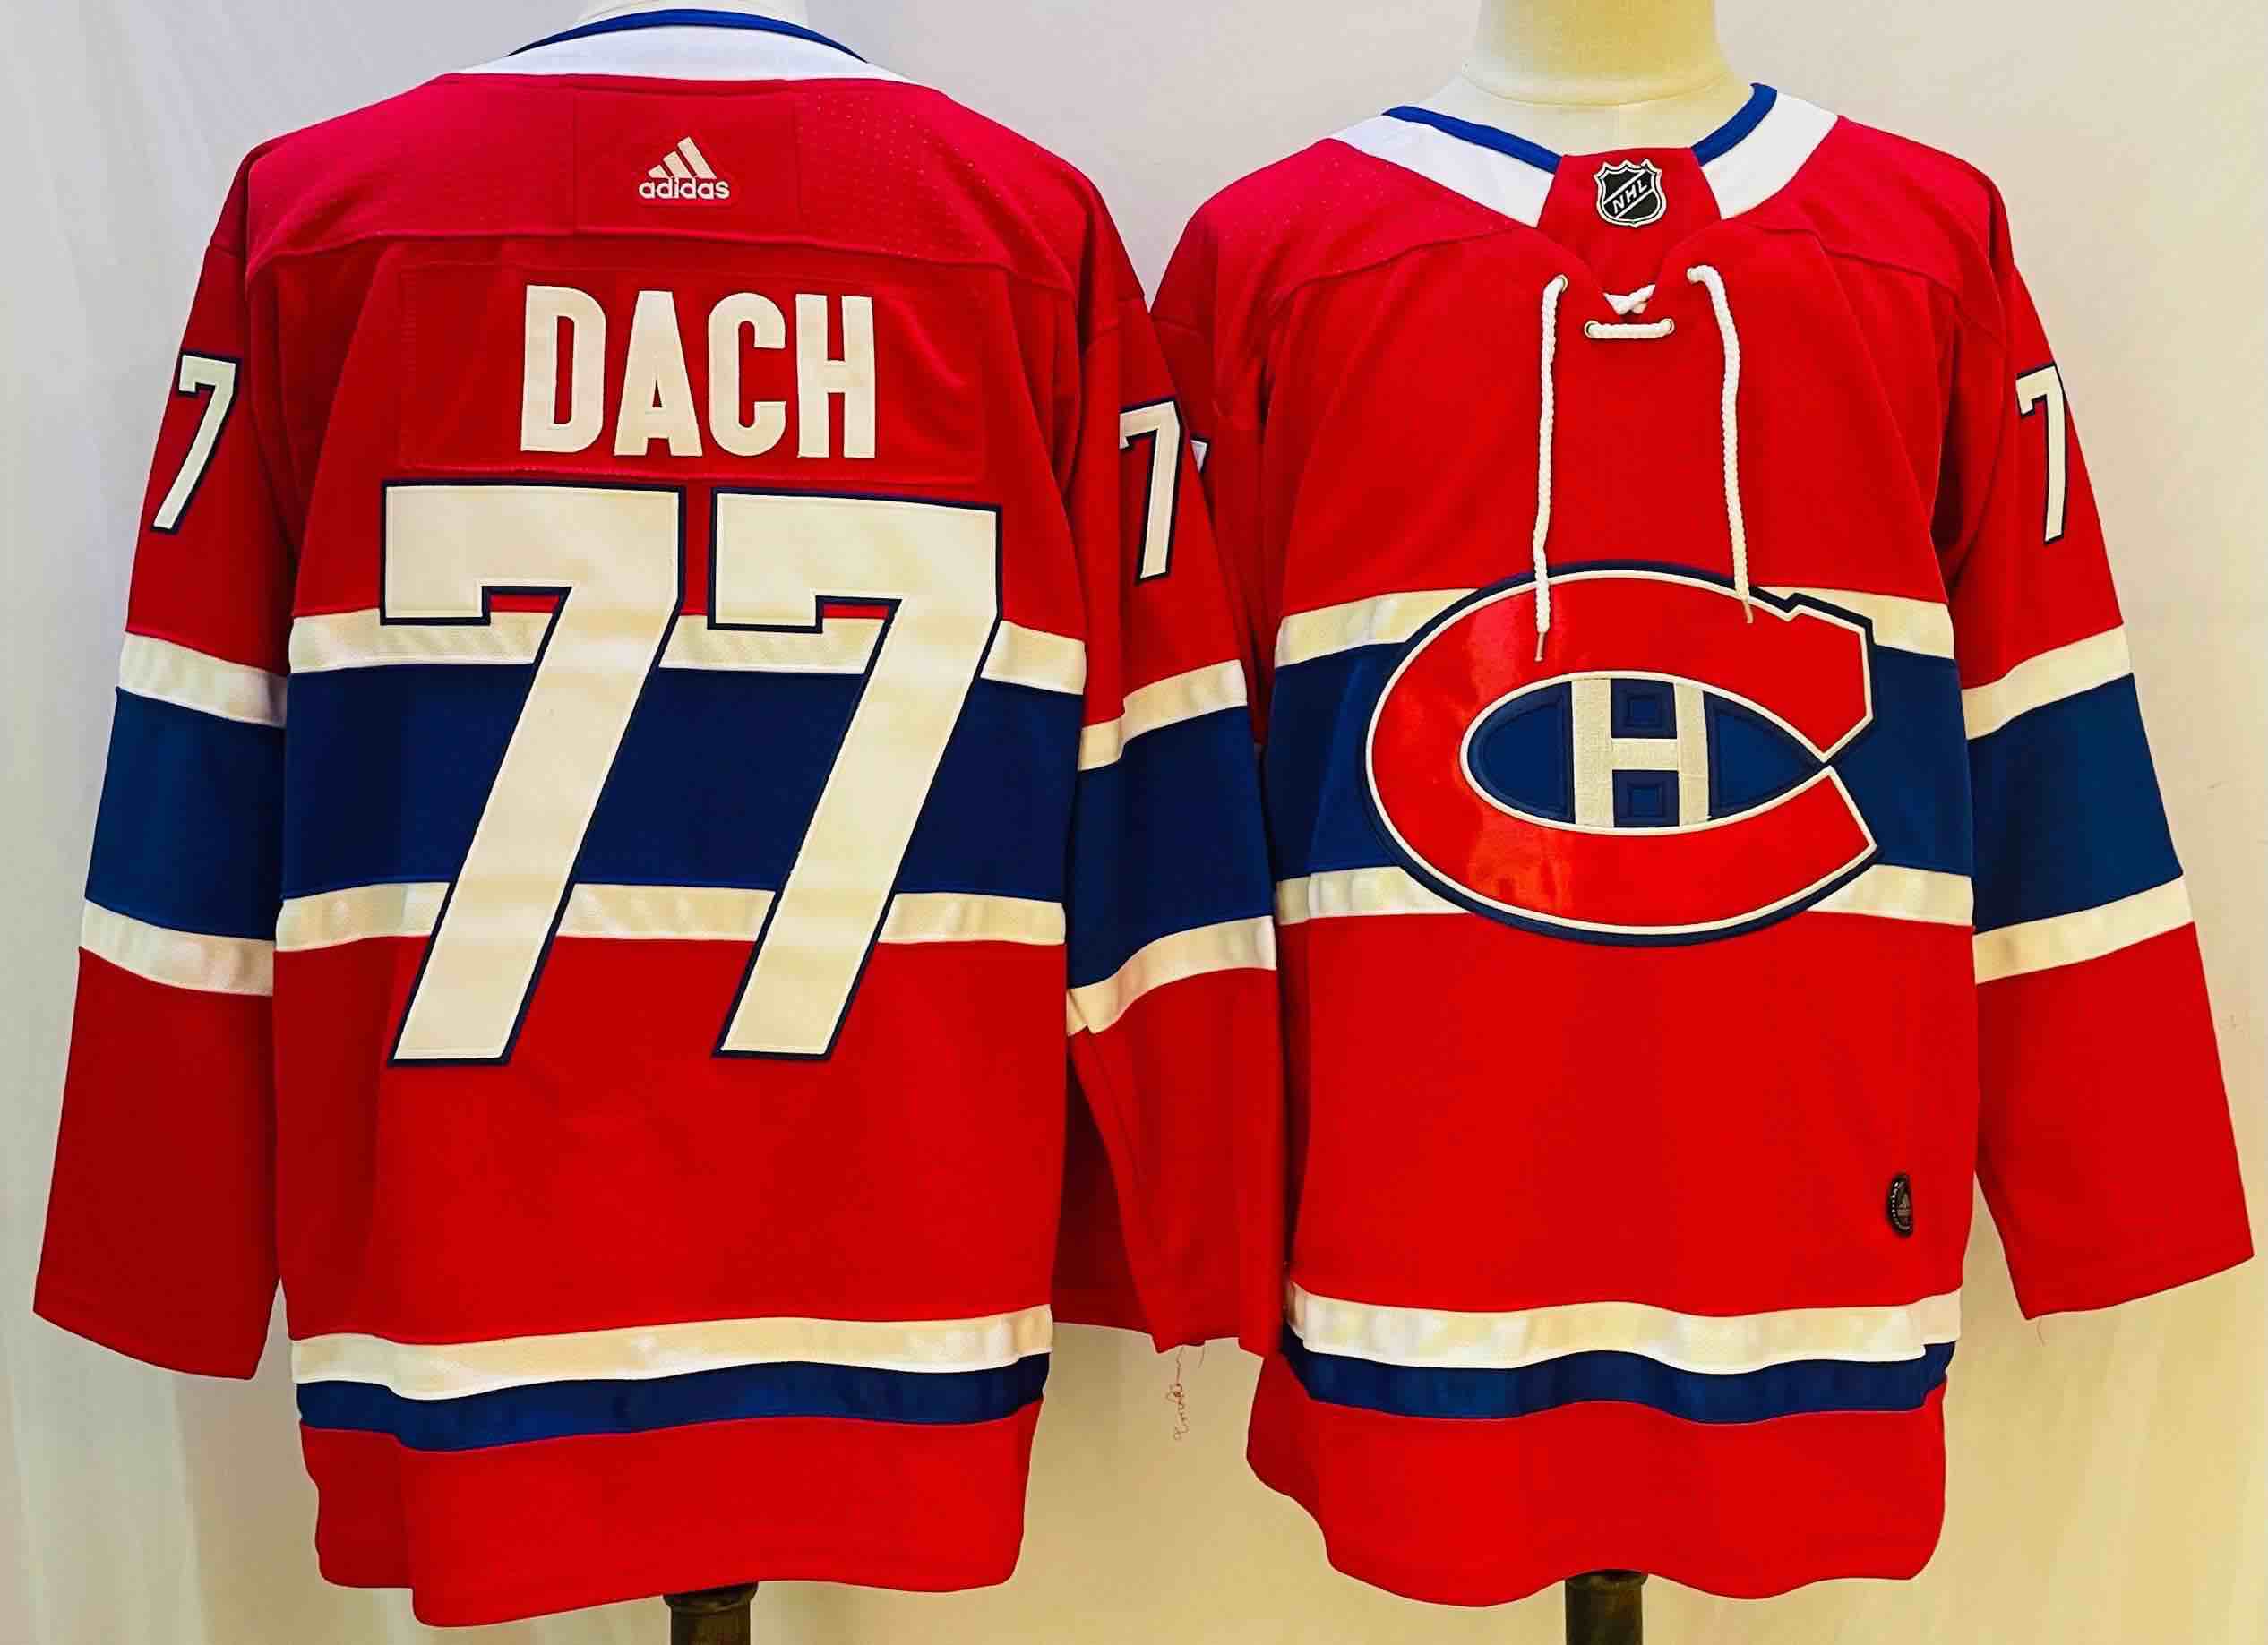 Adidas NHL Montreal Canadiens #77 Dach Red Jersey